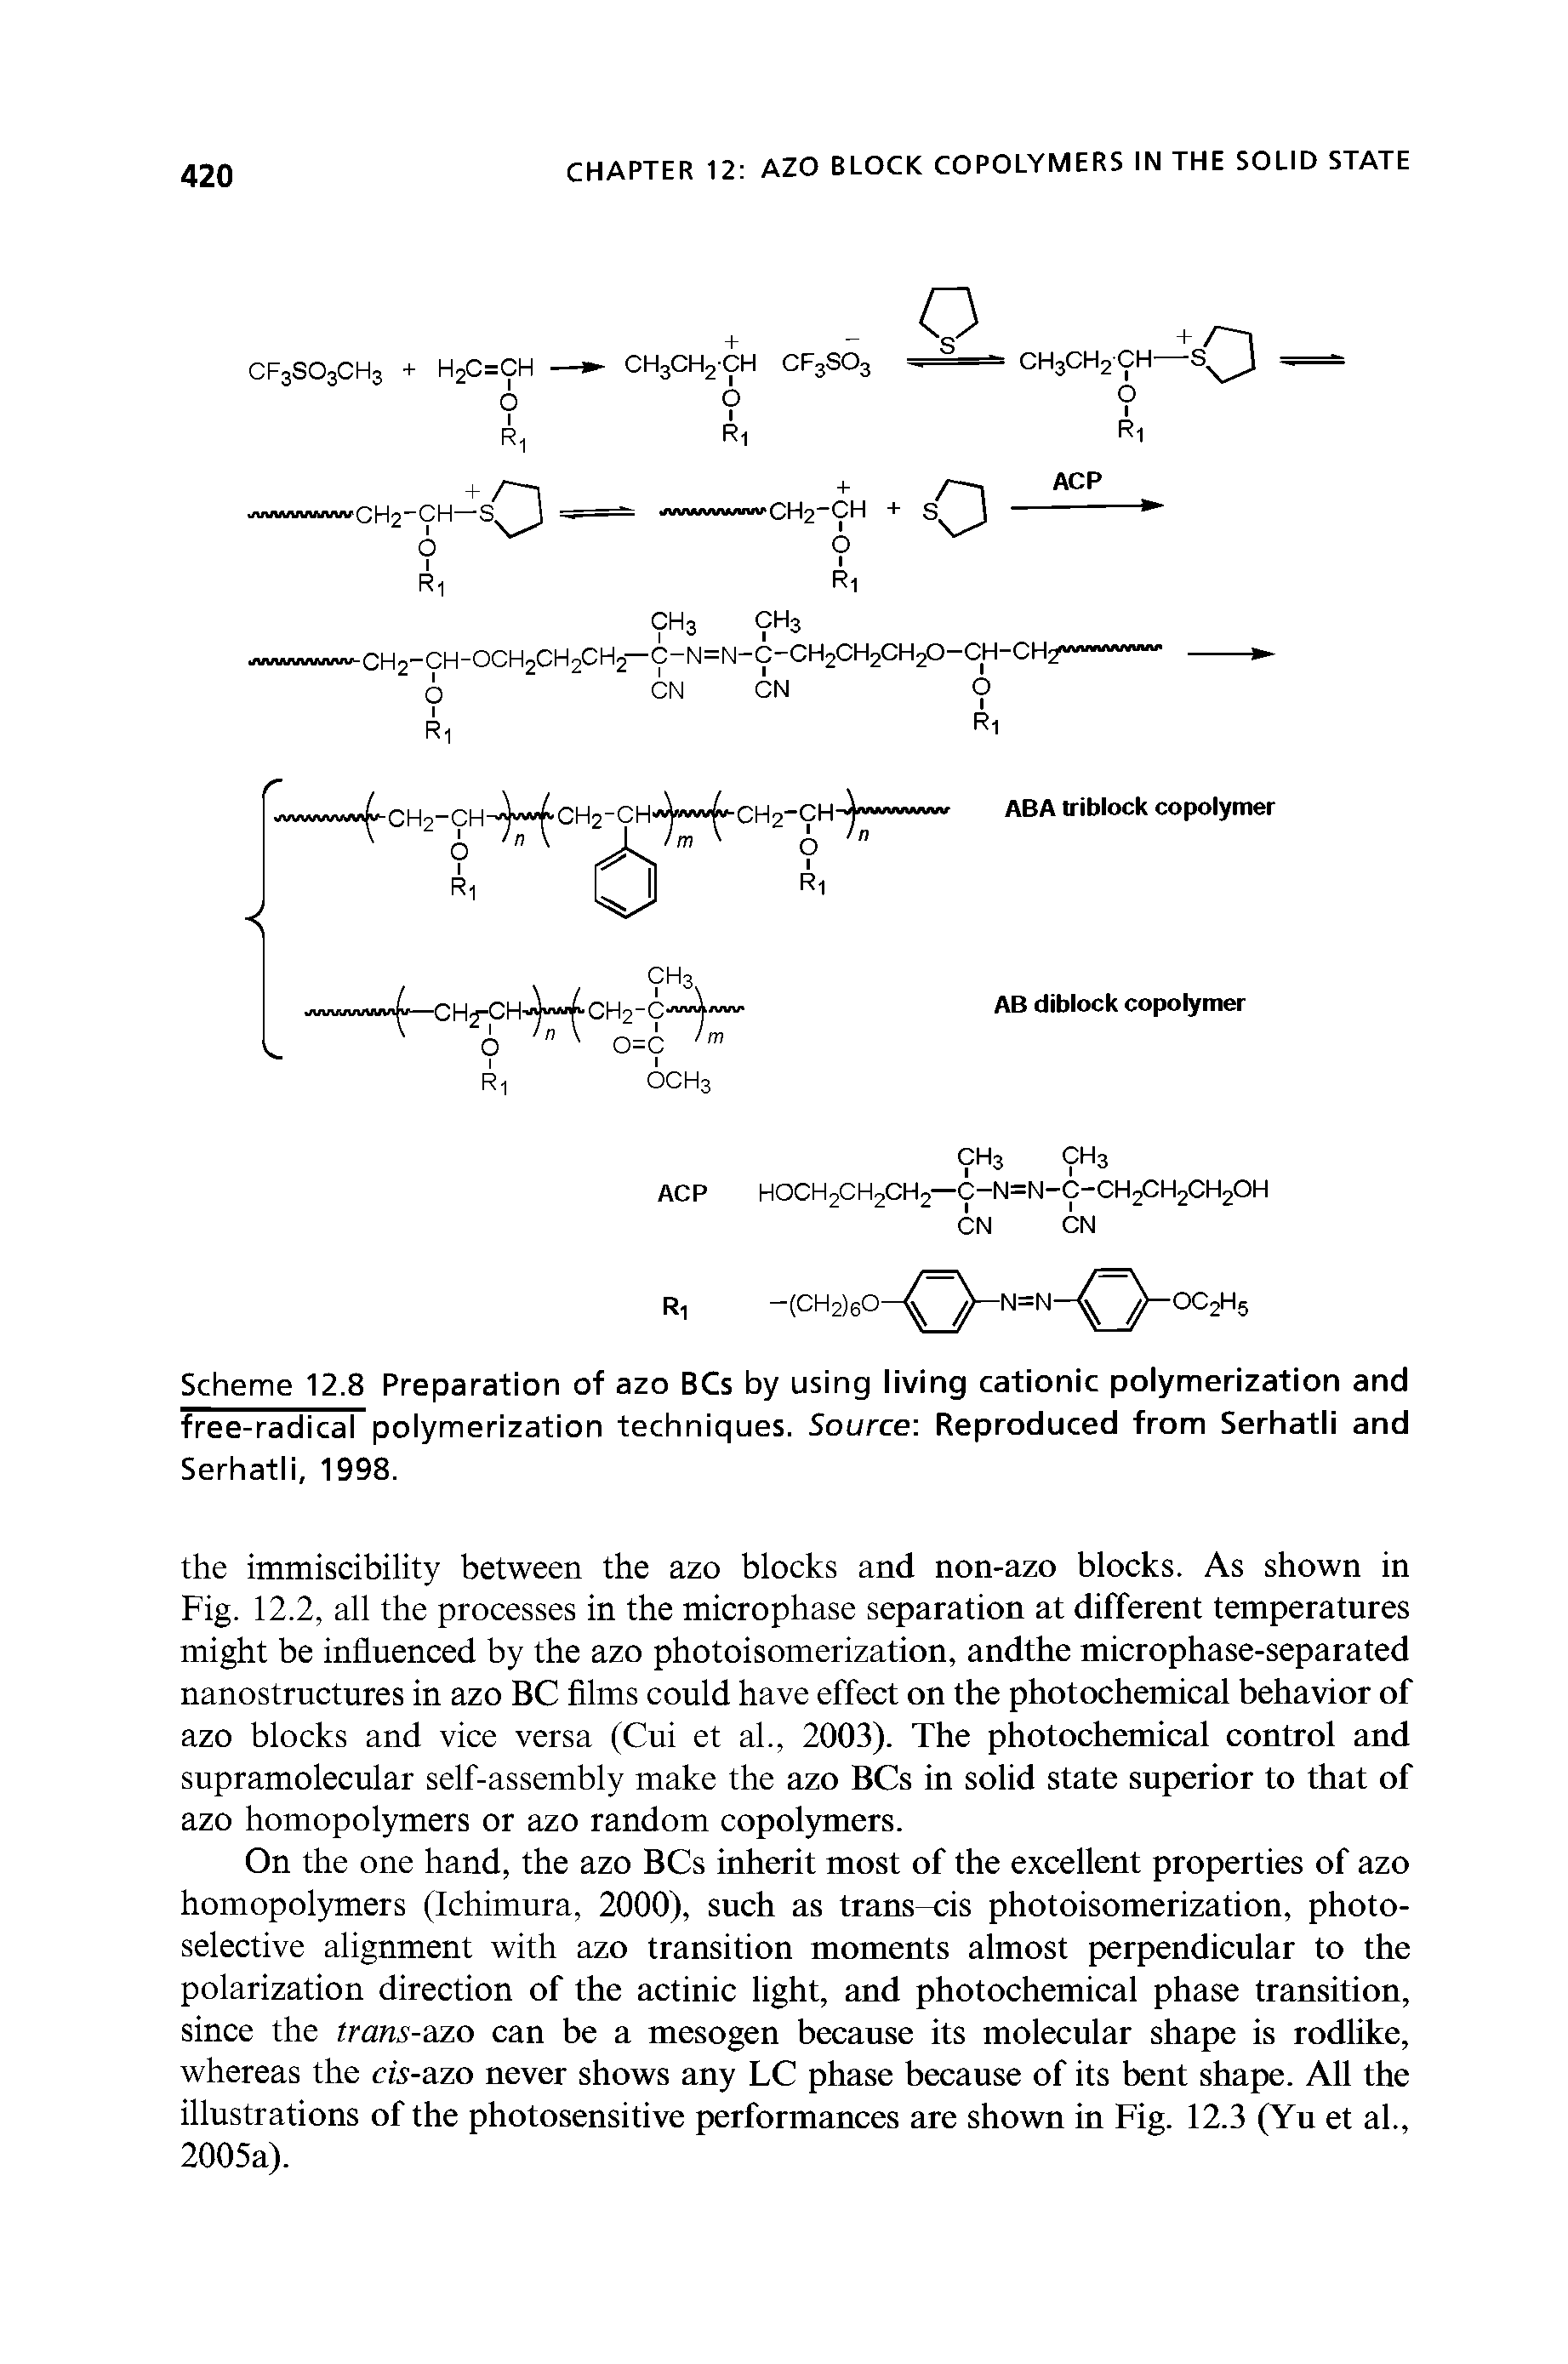 Scheme 12.8 Preparation of azo BCs by using living cationic polymerization and free-radical polymerization techniques. Source Reproduced from Serhatli and Serhatli, 1998.